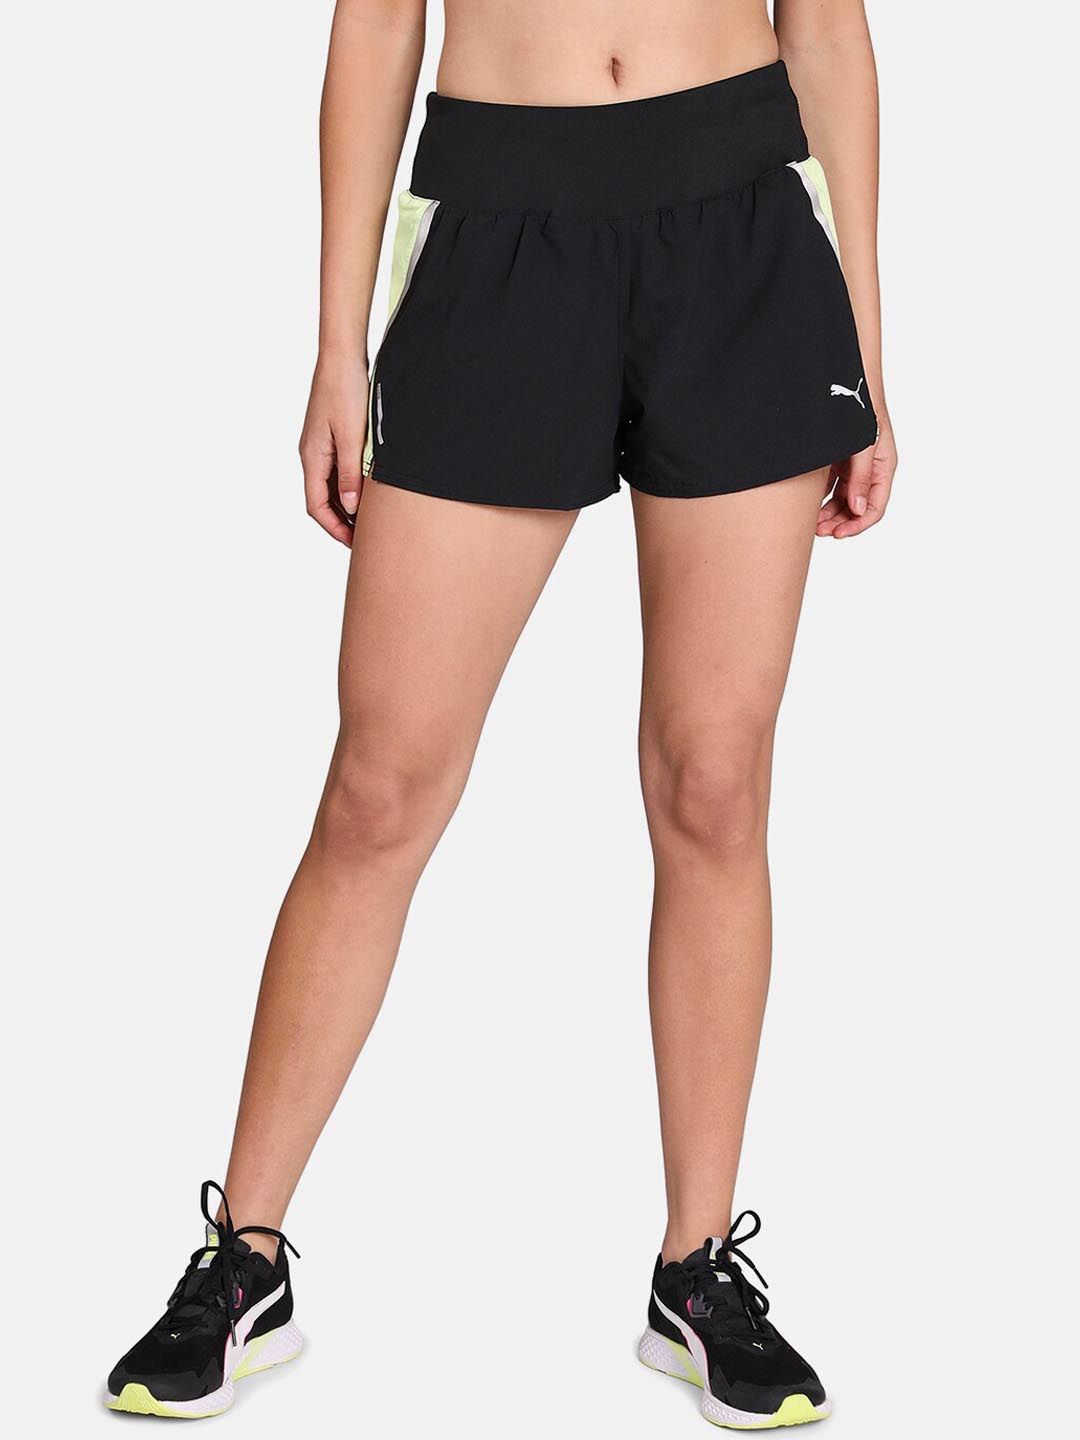 Puma Women Black Solid Regular Fit Sports Shorts Price in India